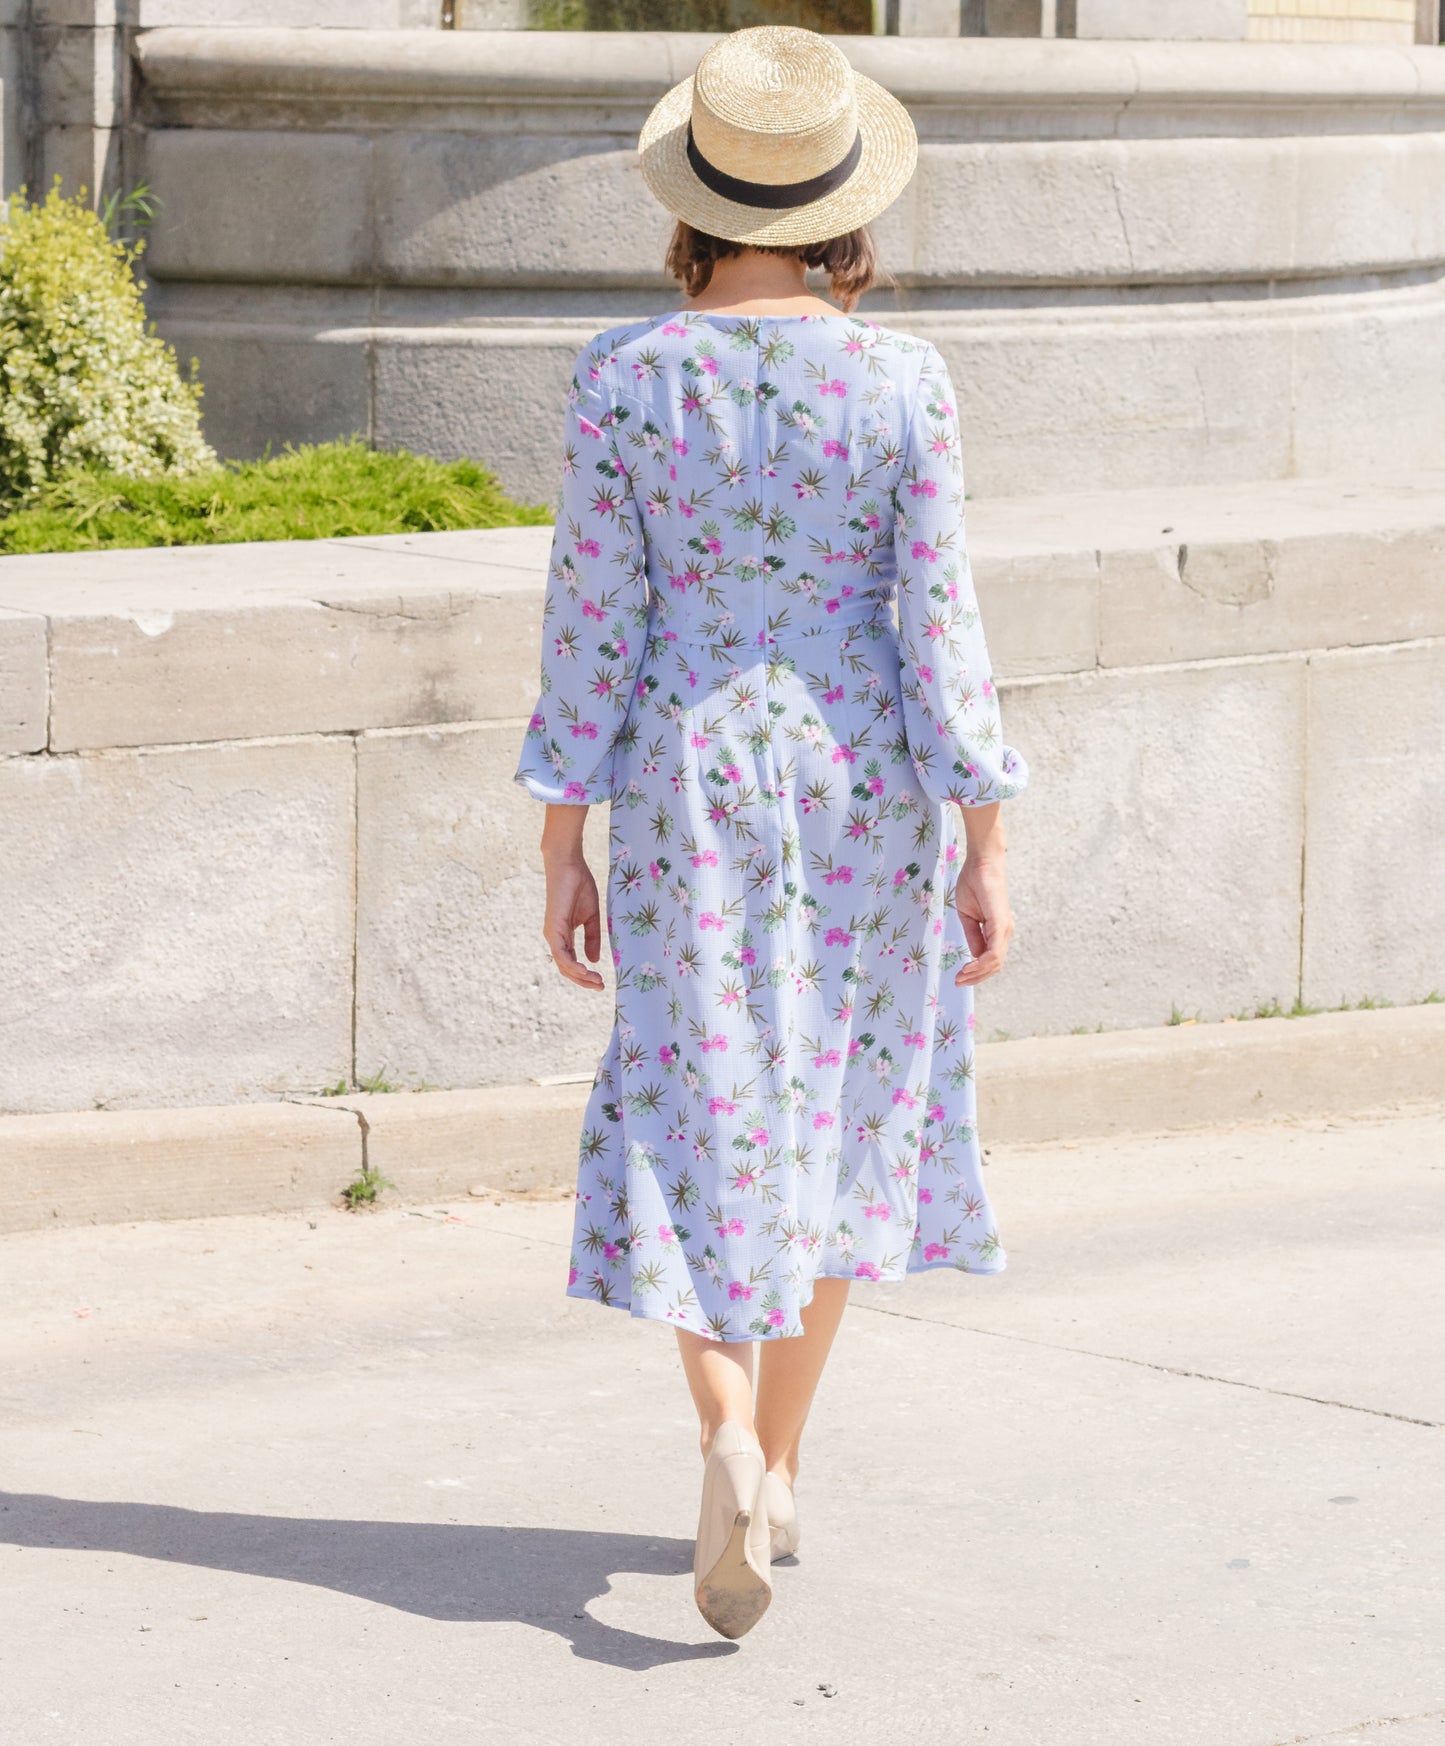 Ethical and sustainable clothing made in Canada - Pros and Cons Apparel. Eloise Dress- Blue floral A line dress. Medium length with long billowy sleeves and elastic sleeve opening. Midi skirt has loose flowing shape and high slit. Bodice includes gathered front and sweetheart neckline.